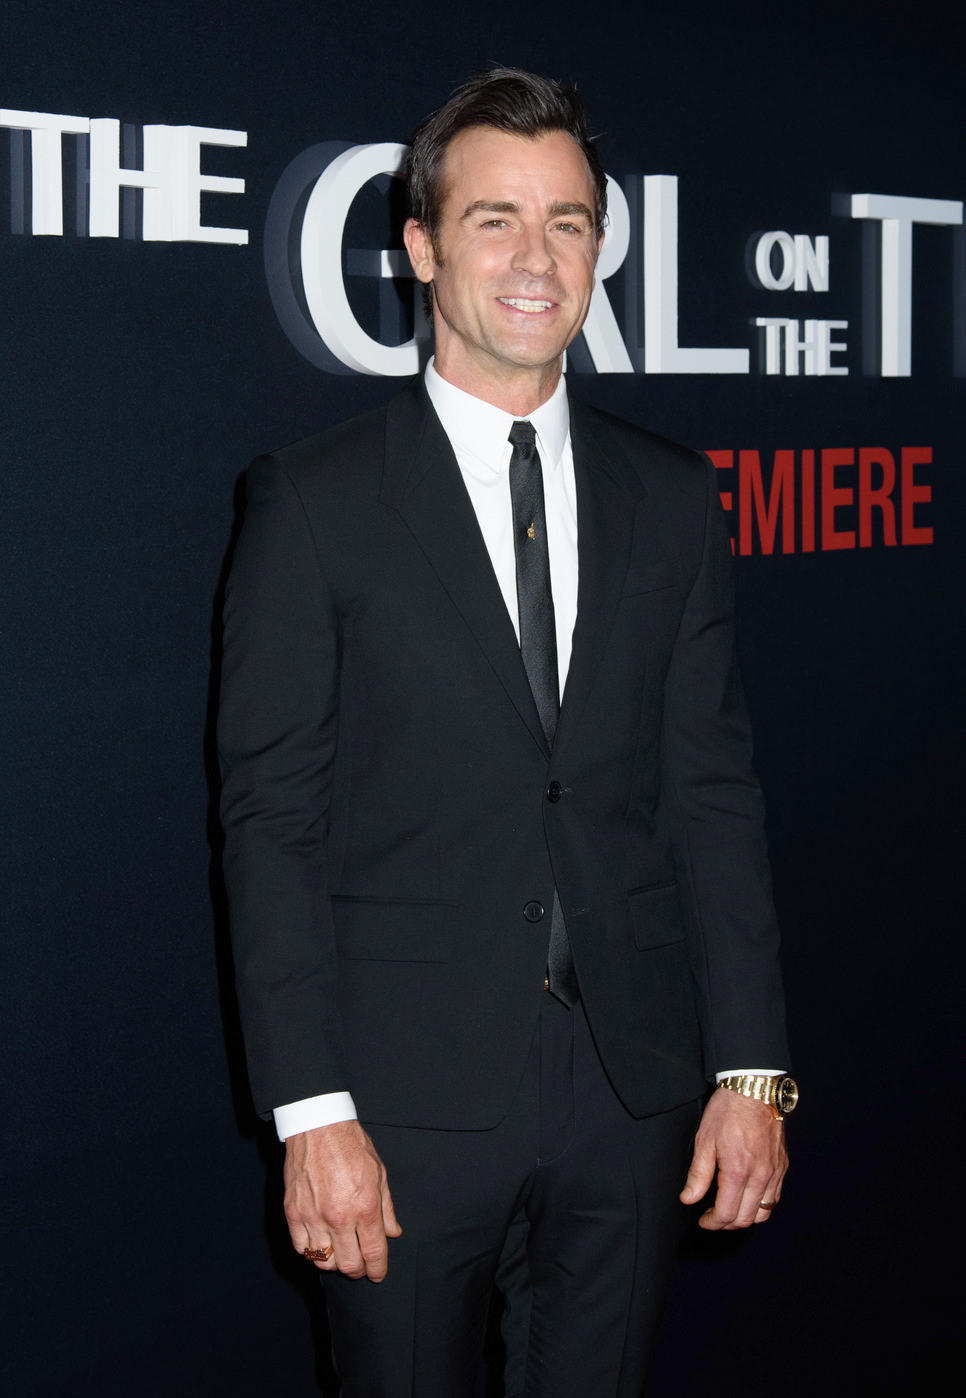 justin-theroux-the-girl-on-the-train-new-york-premiere-red-carpet-fashion-tom-lorenzo-site-1